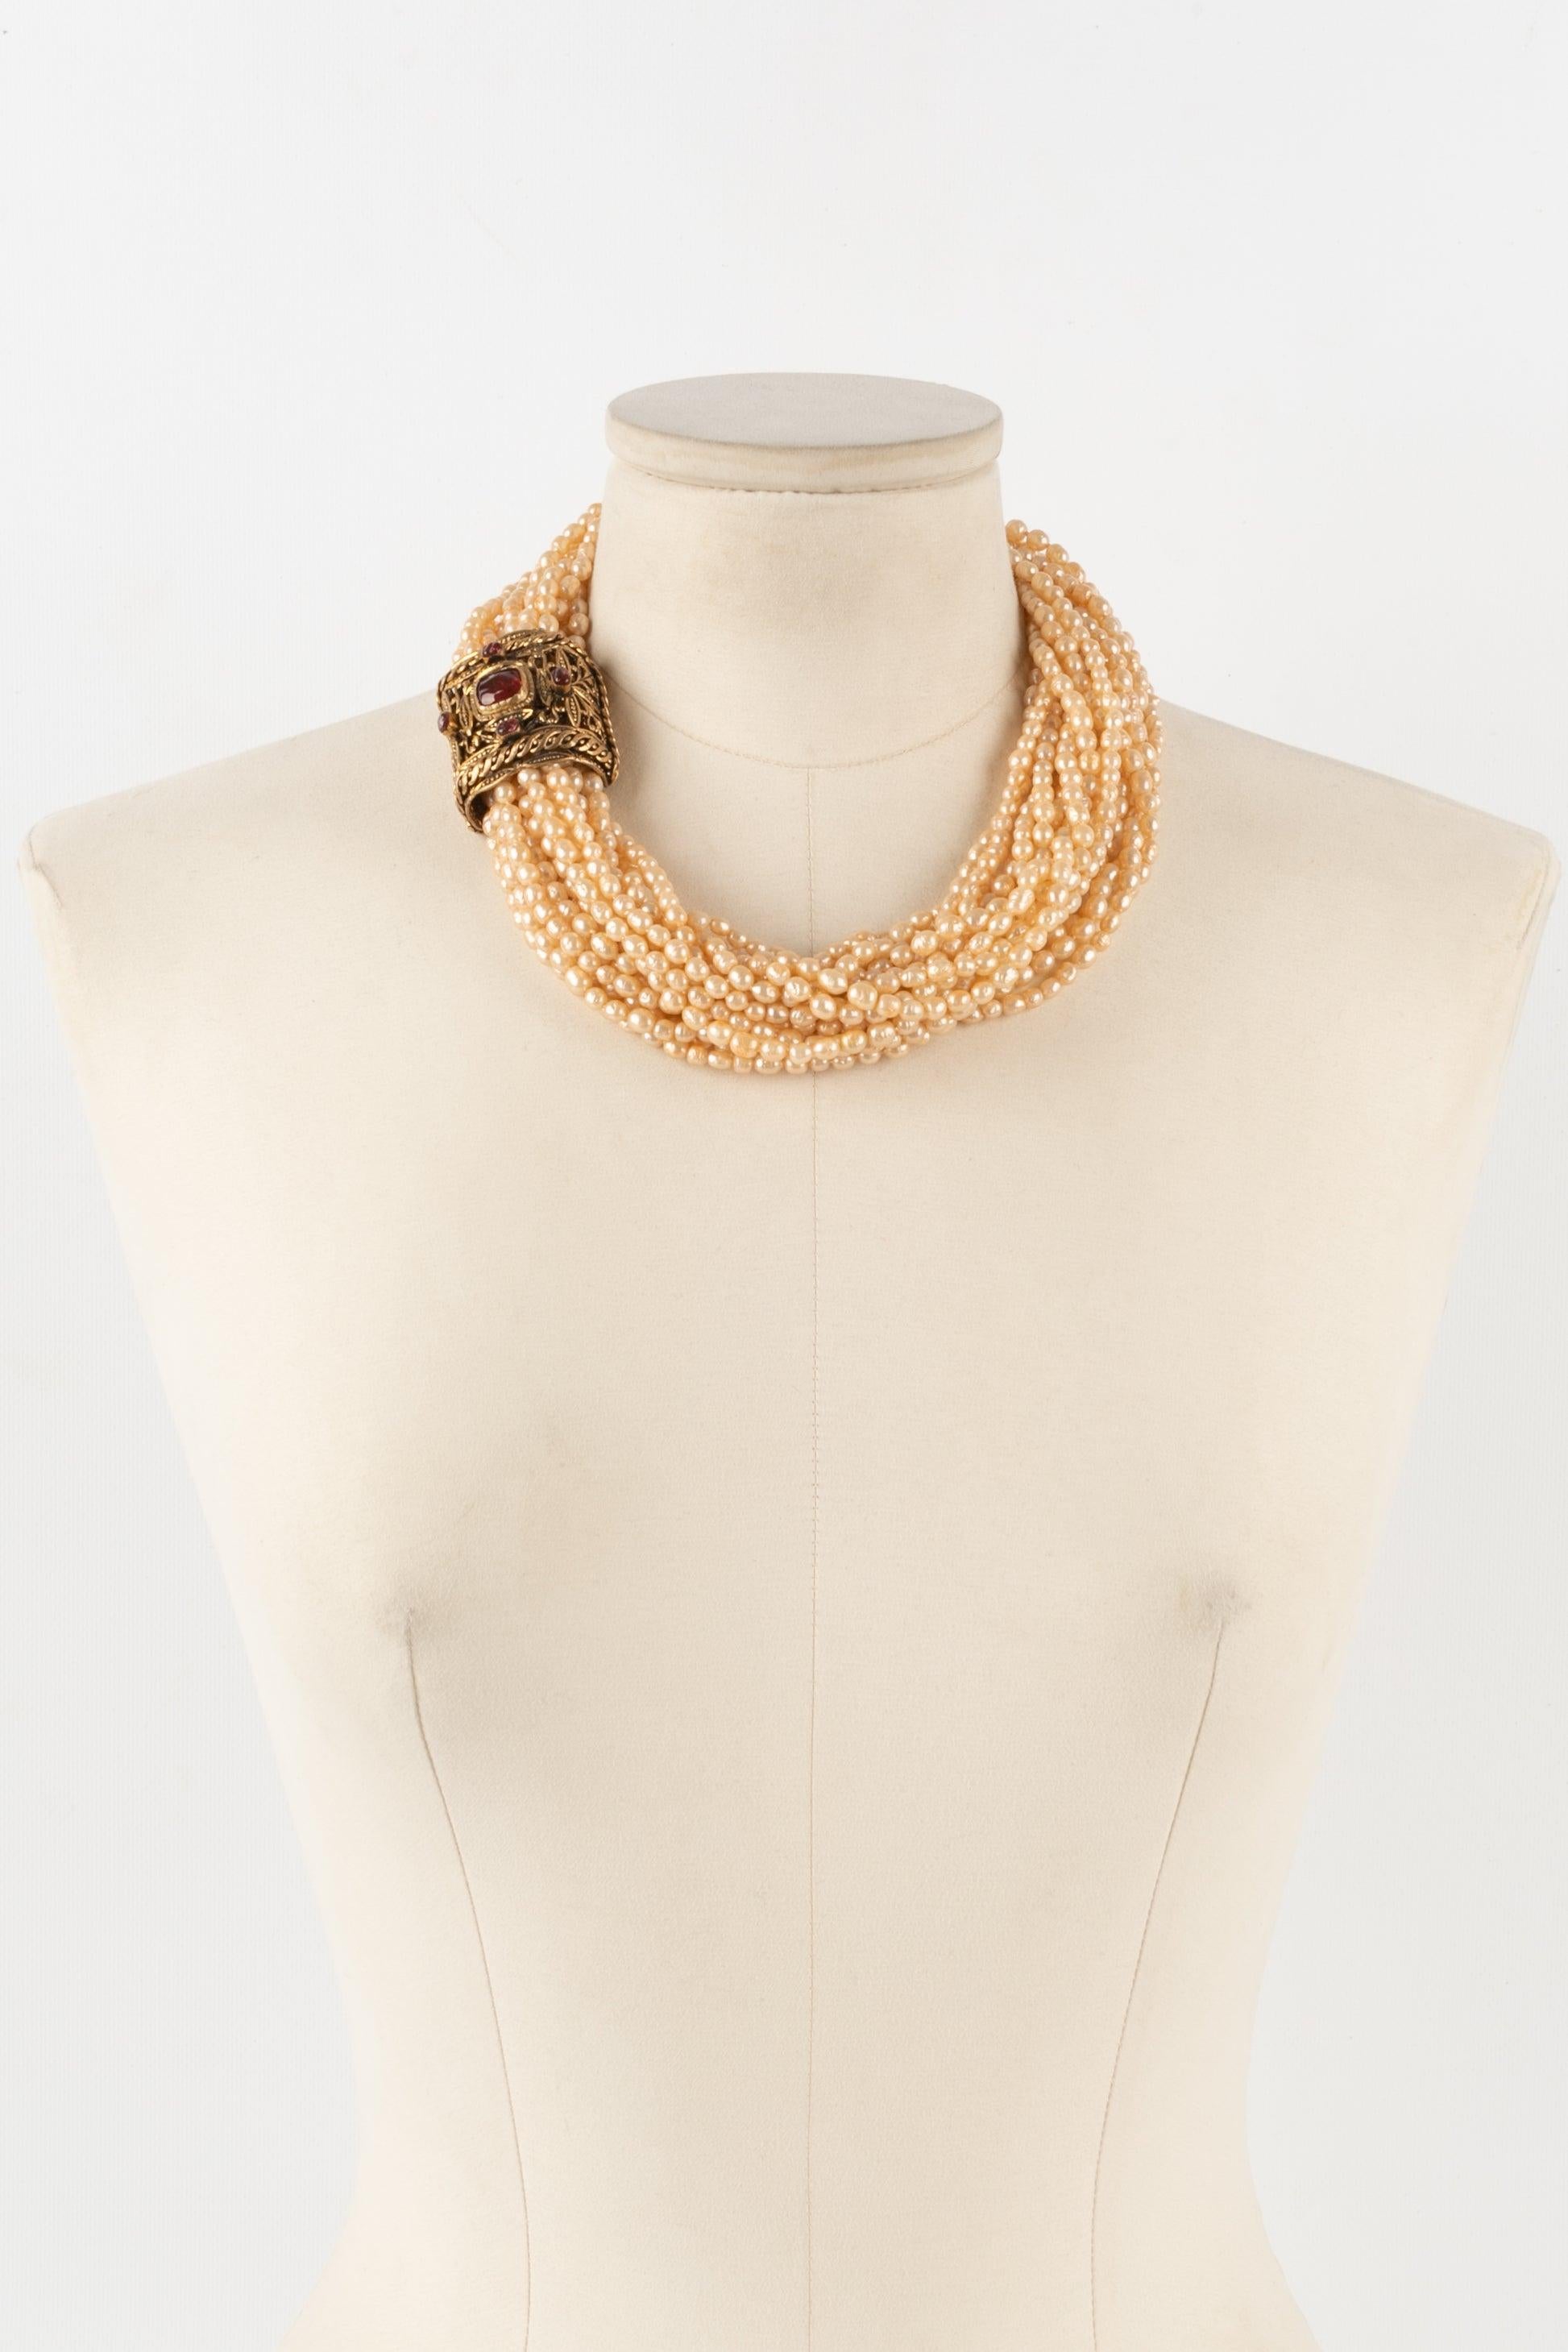 Chanel - (Made in France) Multi-row choker composed of costume pearls, red glass paste, and an openwork golden metal fastener.

Additional information:
Condition: Very good condition
Dimensions: Length: 47 cm

Seller reference: CB147